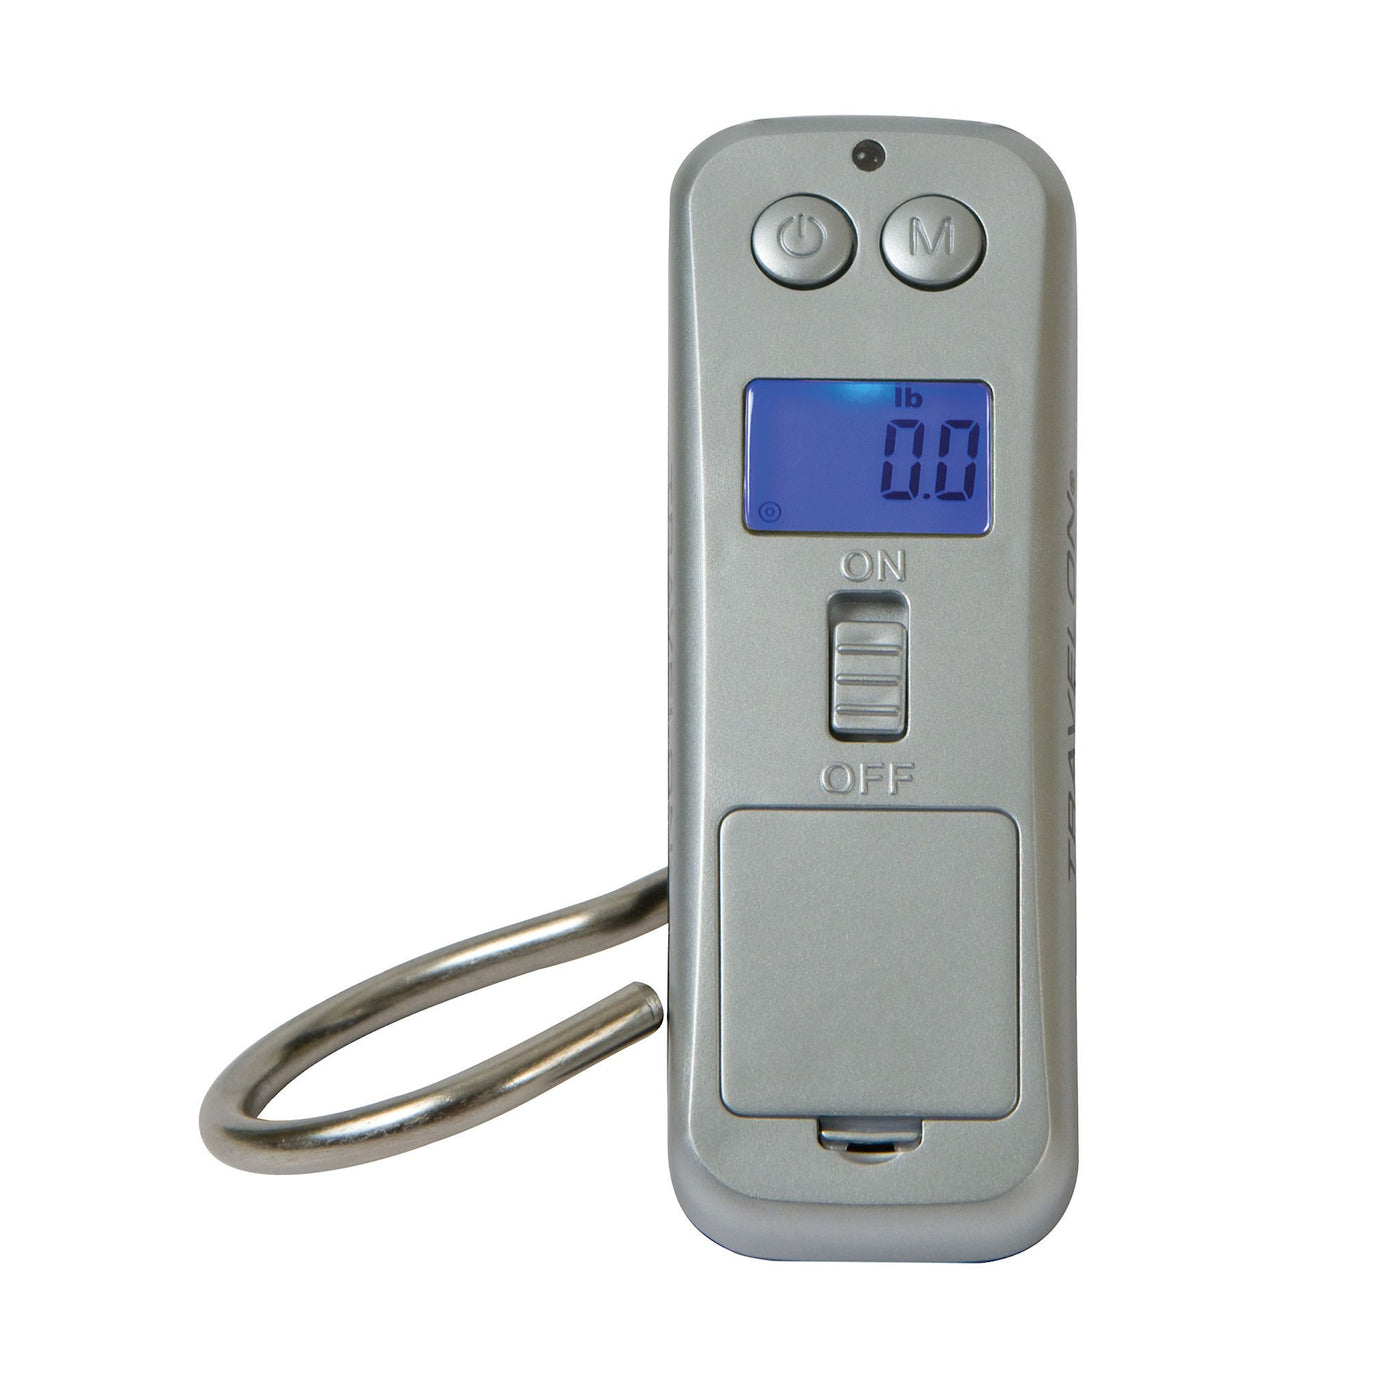 Travel Smart by Conair Digital Luggage Scale